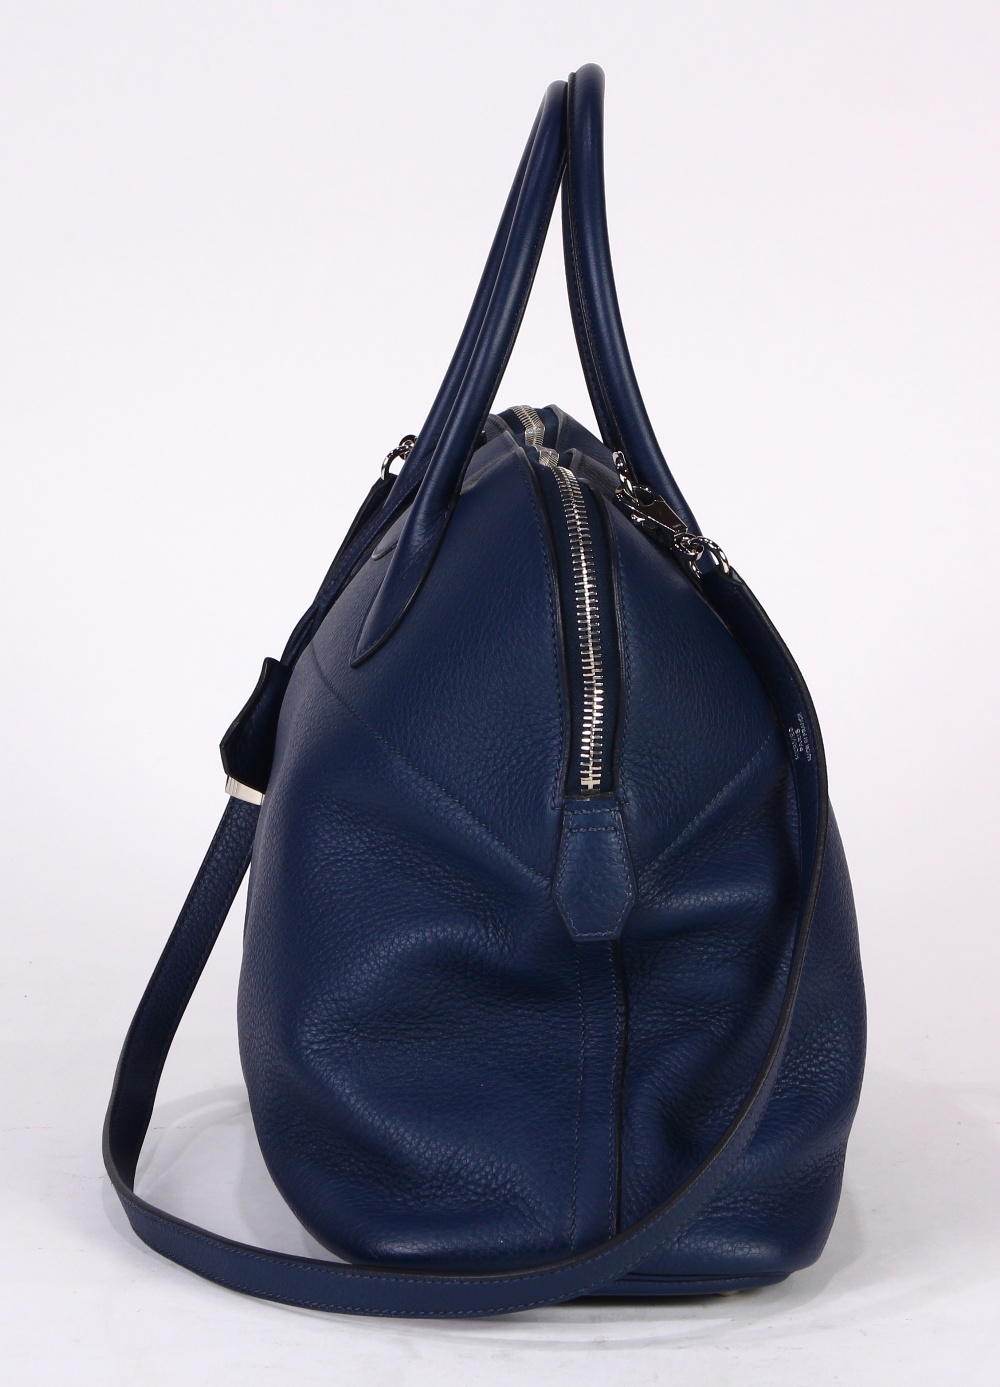 Hermes Clemence Bolide handbag, executed in navy, 35cm, with strap, lock, clochette, dust bag, - Image 3 of 7